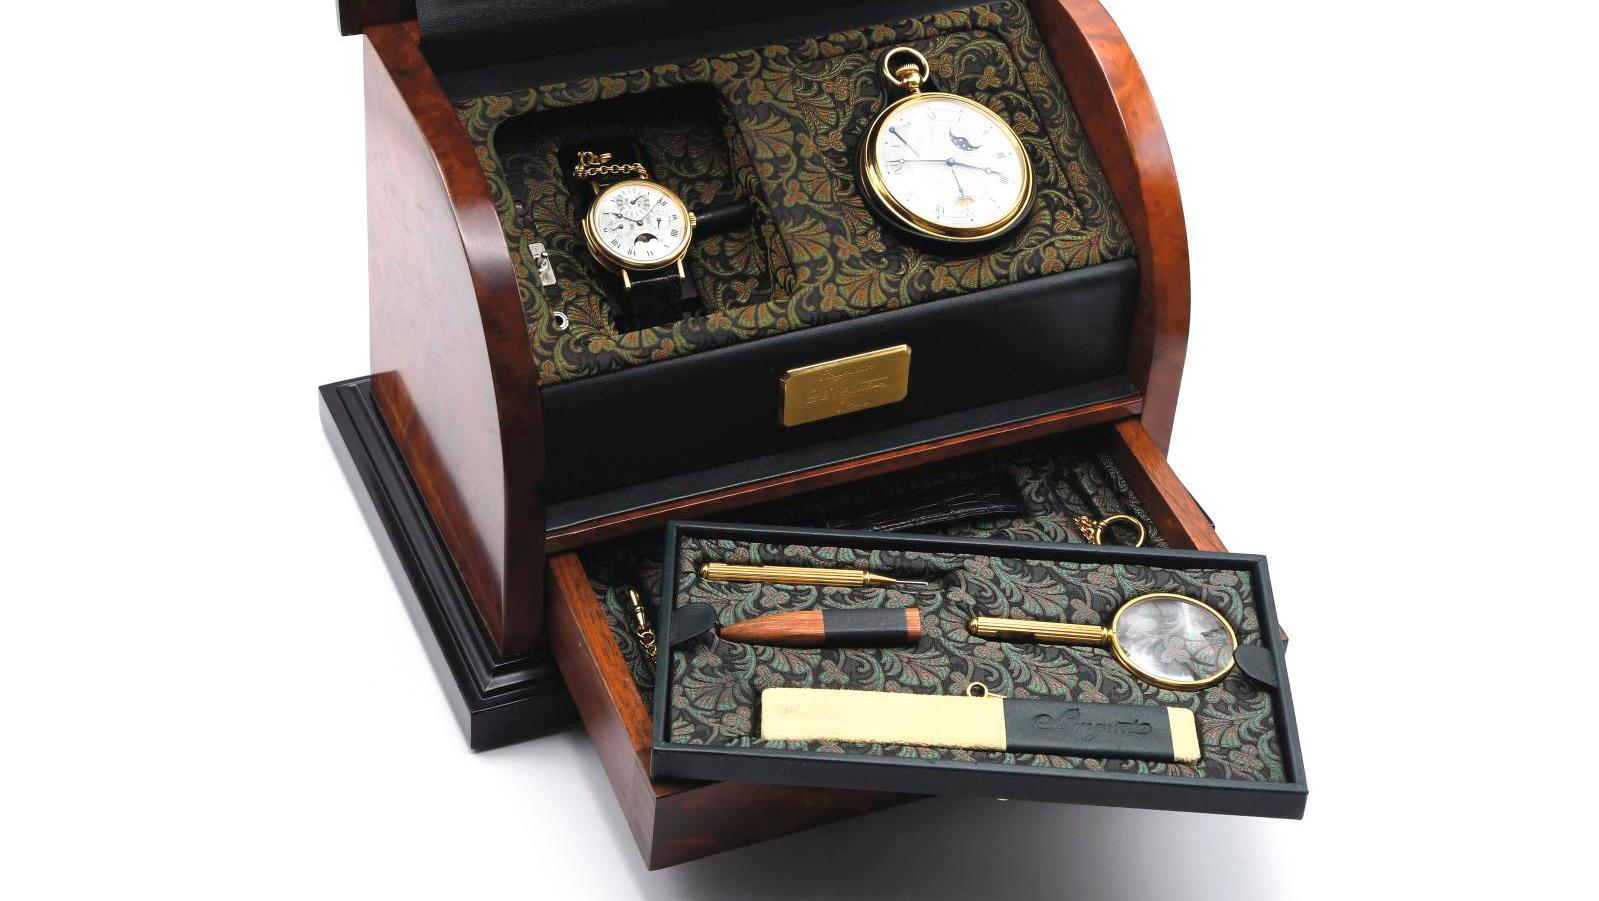 Breguet, Breguet subscription box, c. 1991, no. 44, hazelnut root, upholstered with... Luxury Watches by Breguet and Mido 